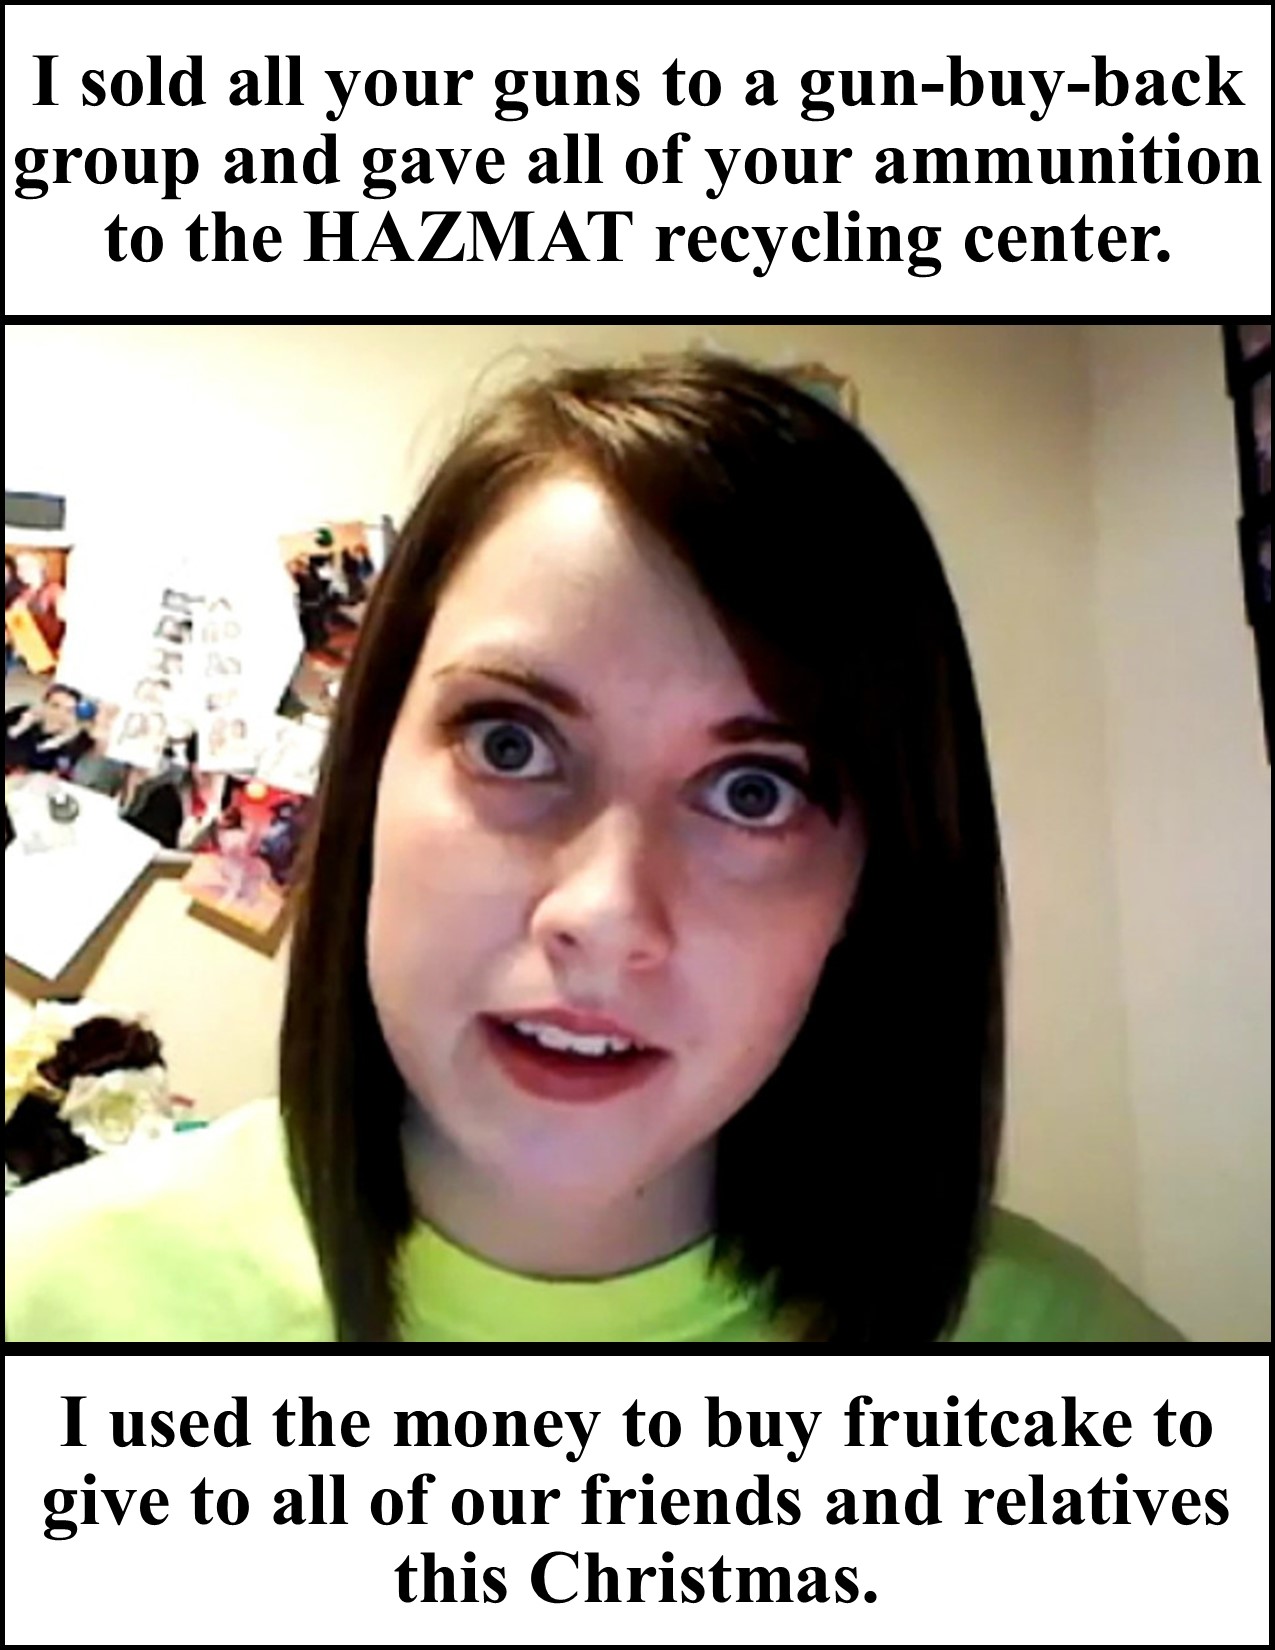 Overly Attached Girlfriend Sold Guns For FruitCake.jpg